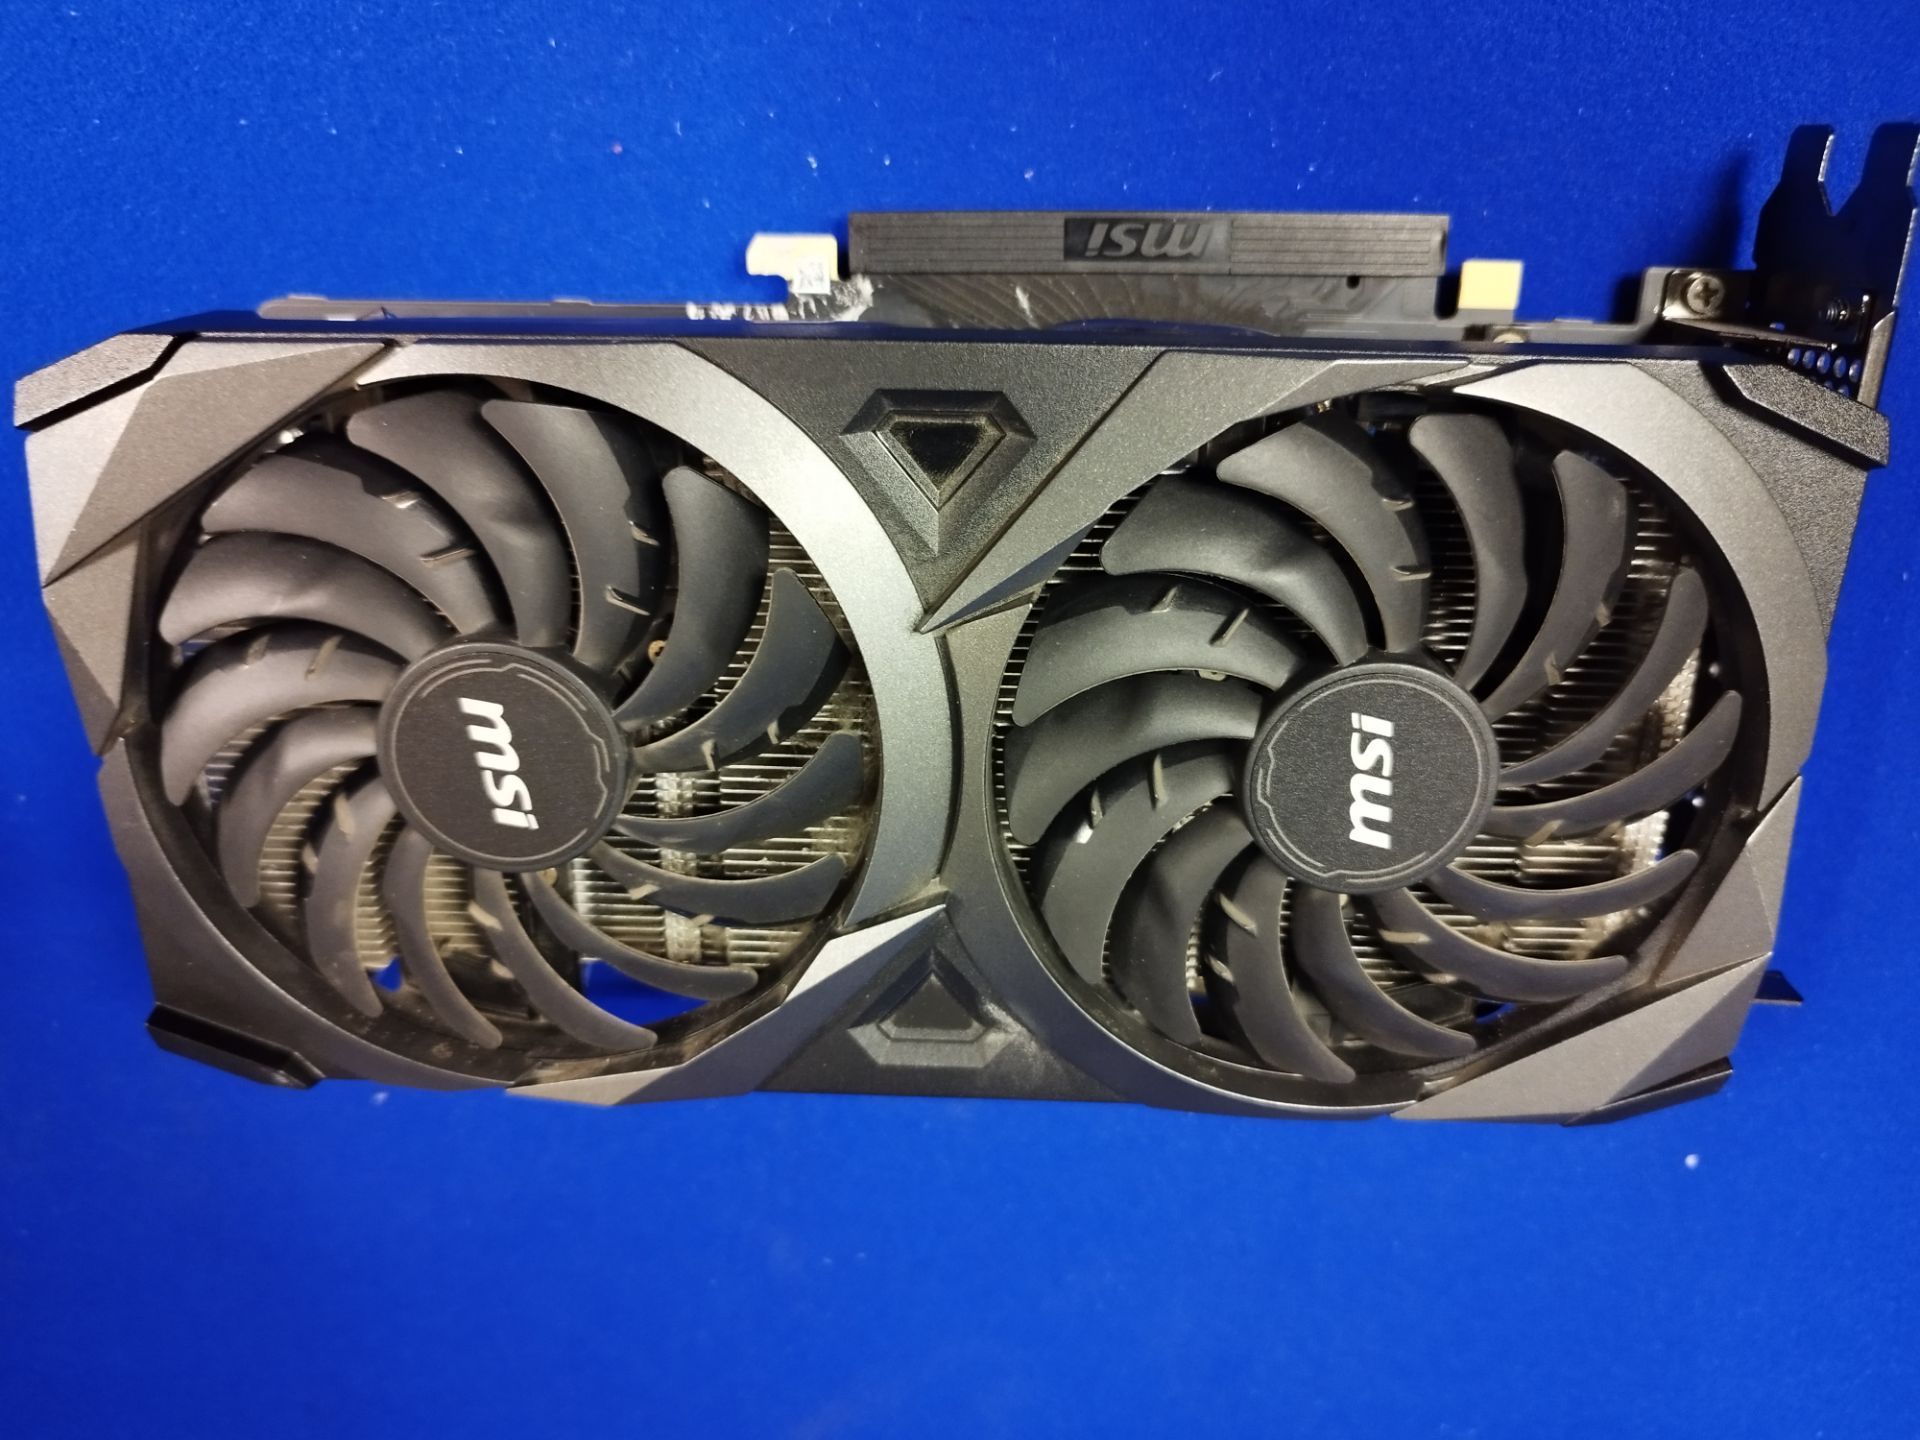 Nvidia GeForce RTX 3070 Graphics Card - Used - PLEASE SEE PHOTOS - Image 7 of 7